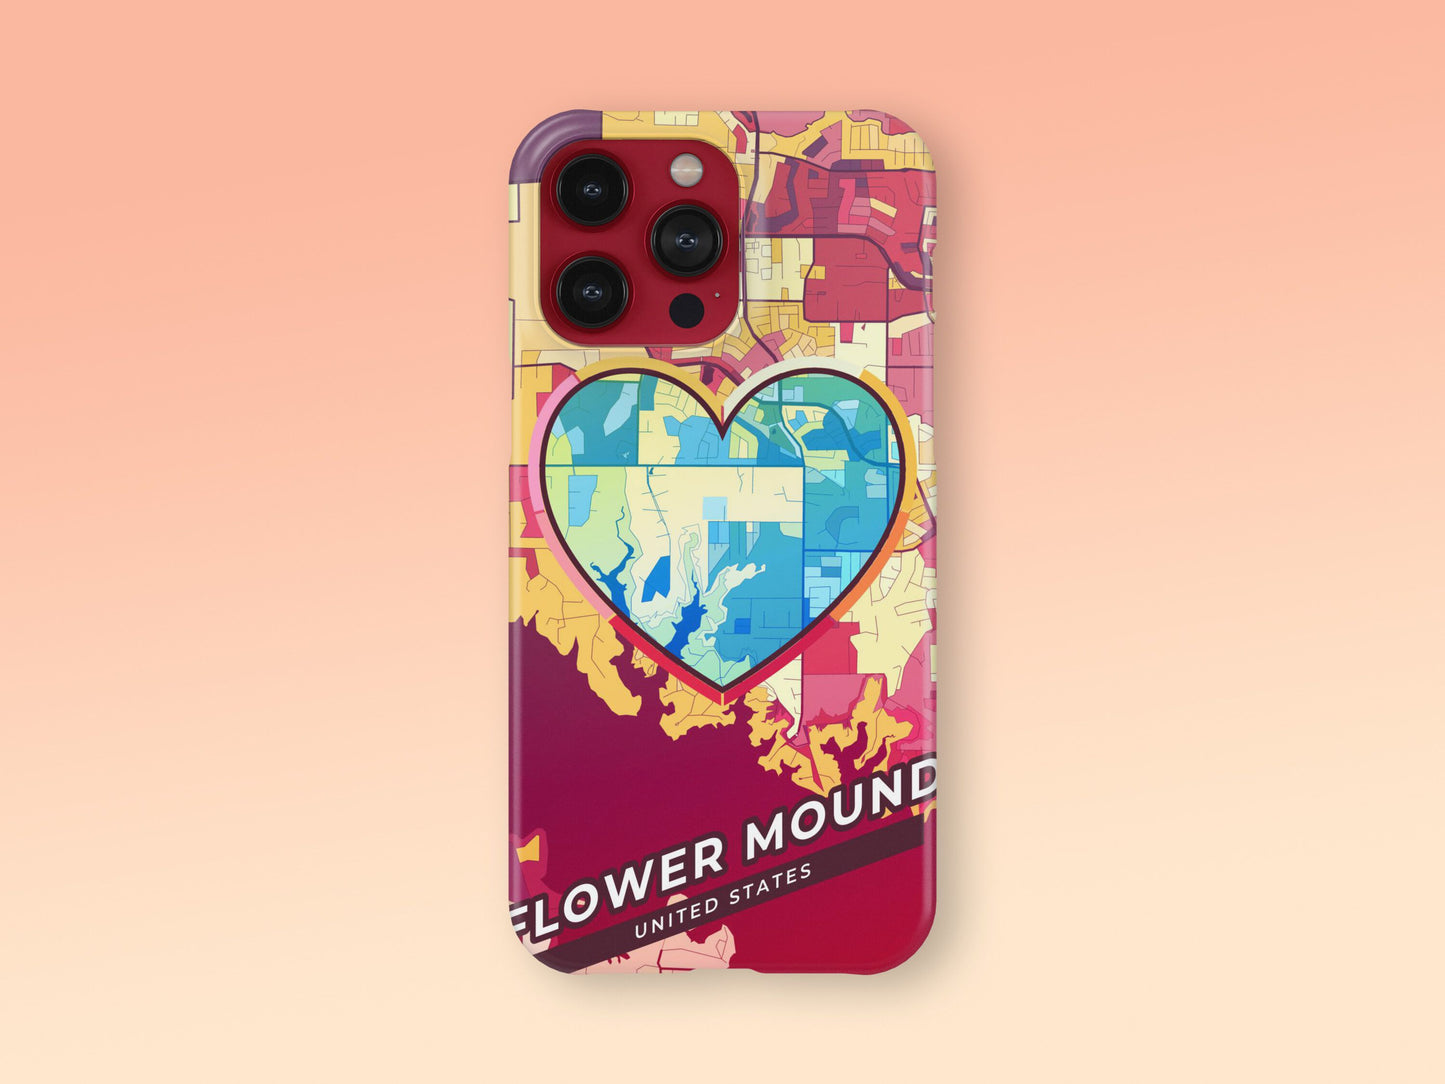 Flower Mound Texas slim phone case with colorful icon. Birthday, wedding or housewarming gift. Couple match cases. 2